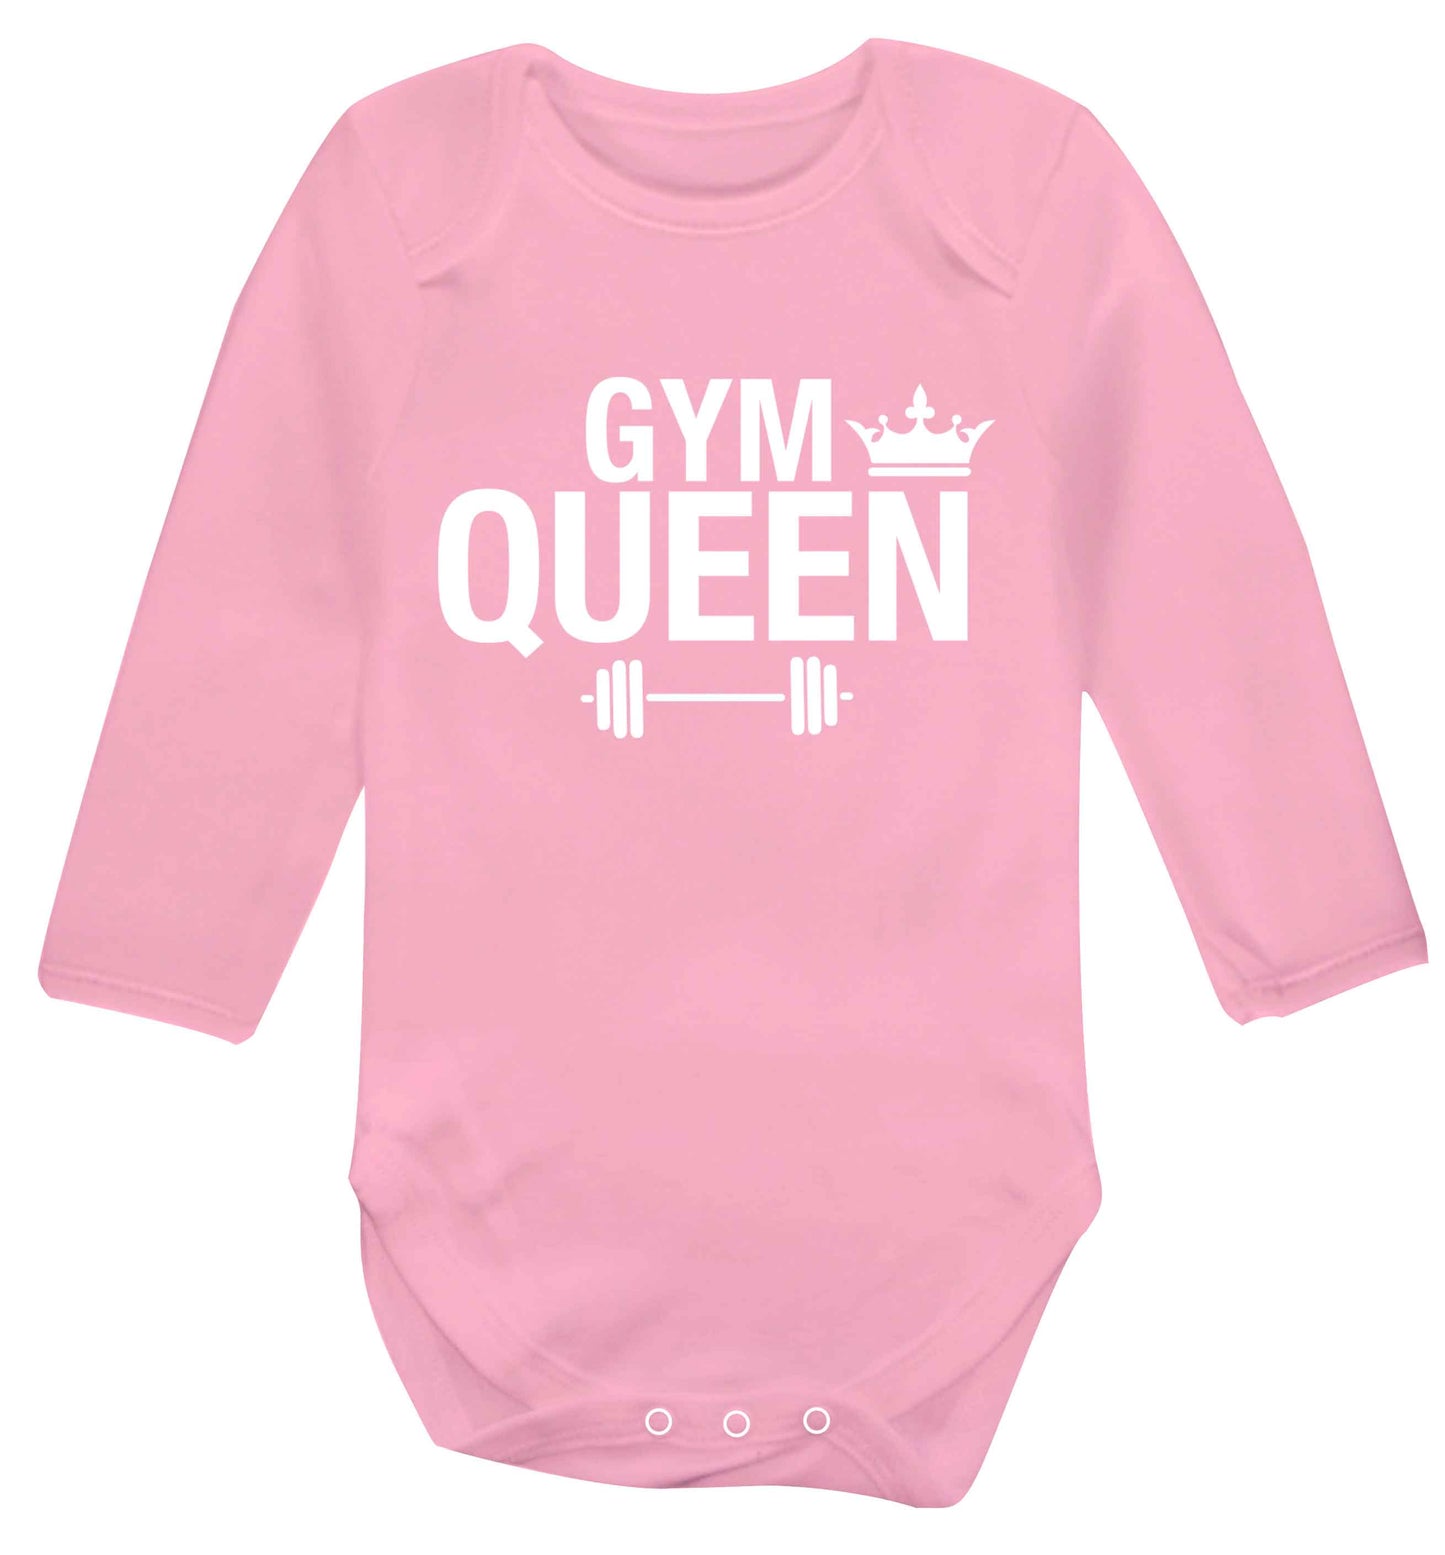 Gym queen Baby Vest long sleeved pale pink 6-12 months